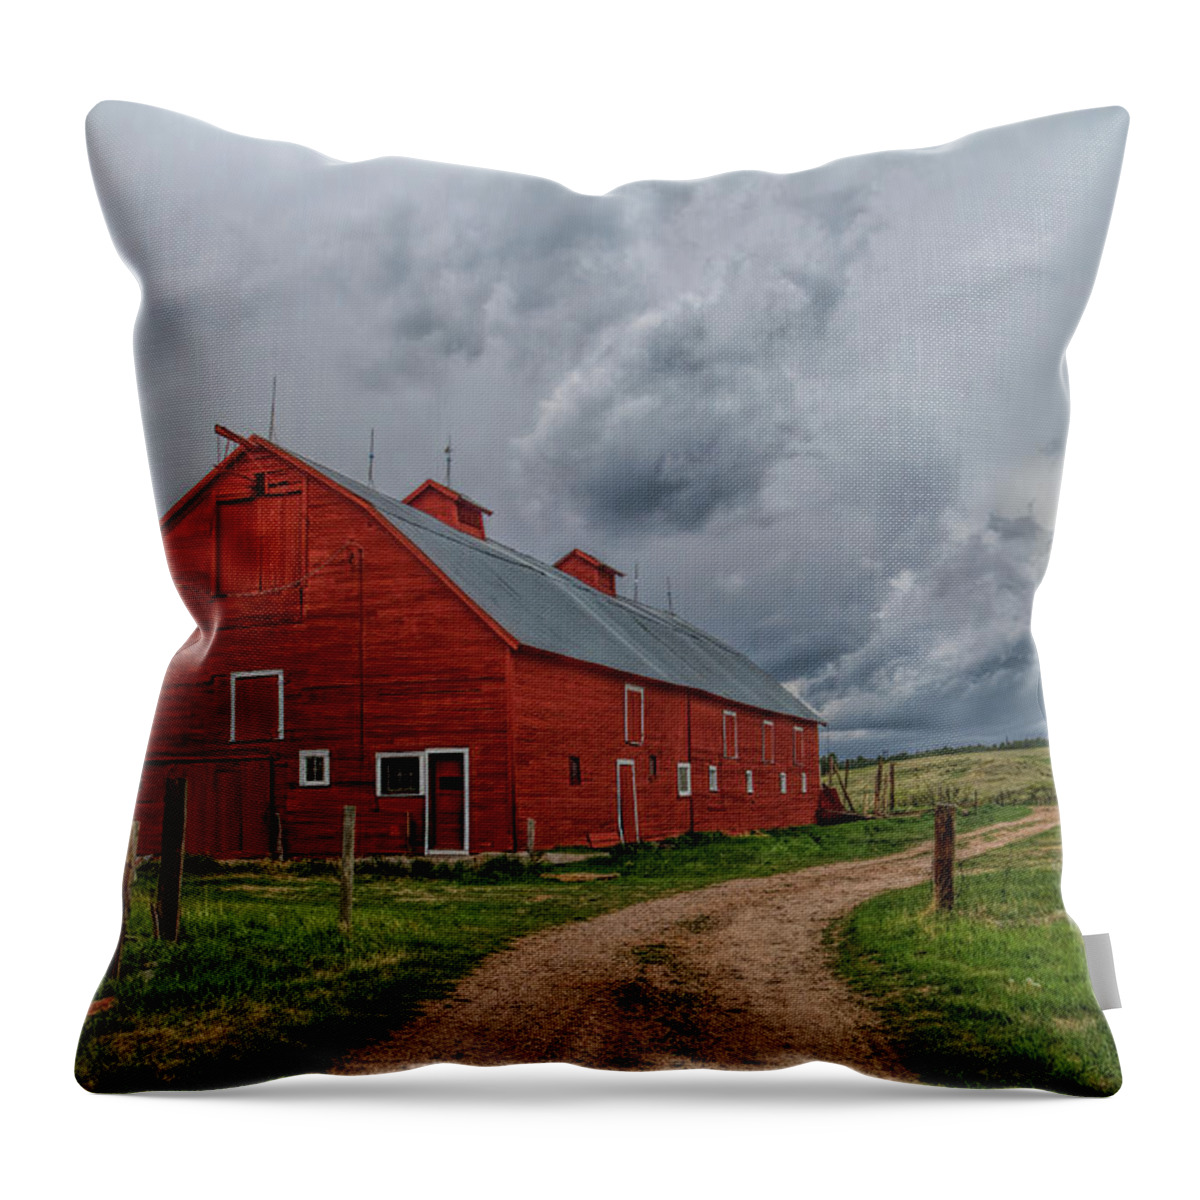 Barn Throw Pillow featuring the photograph One Last Look by Alana Thrower